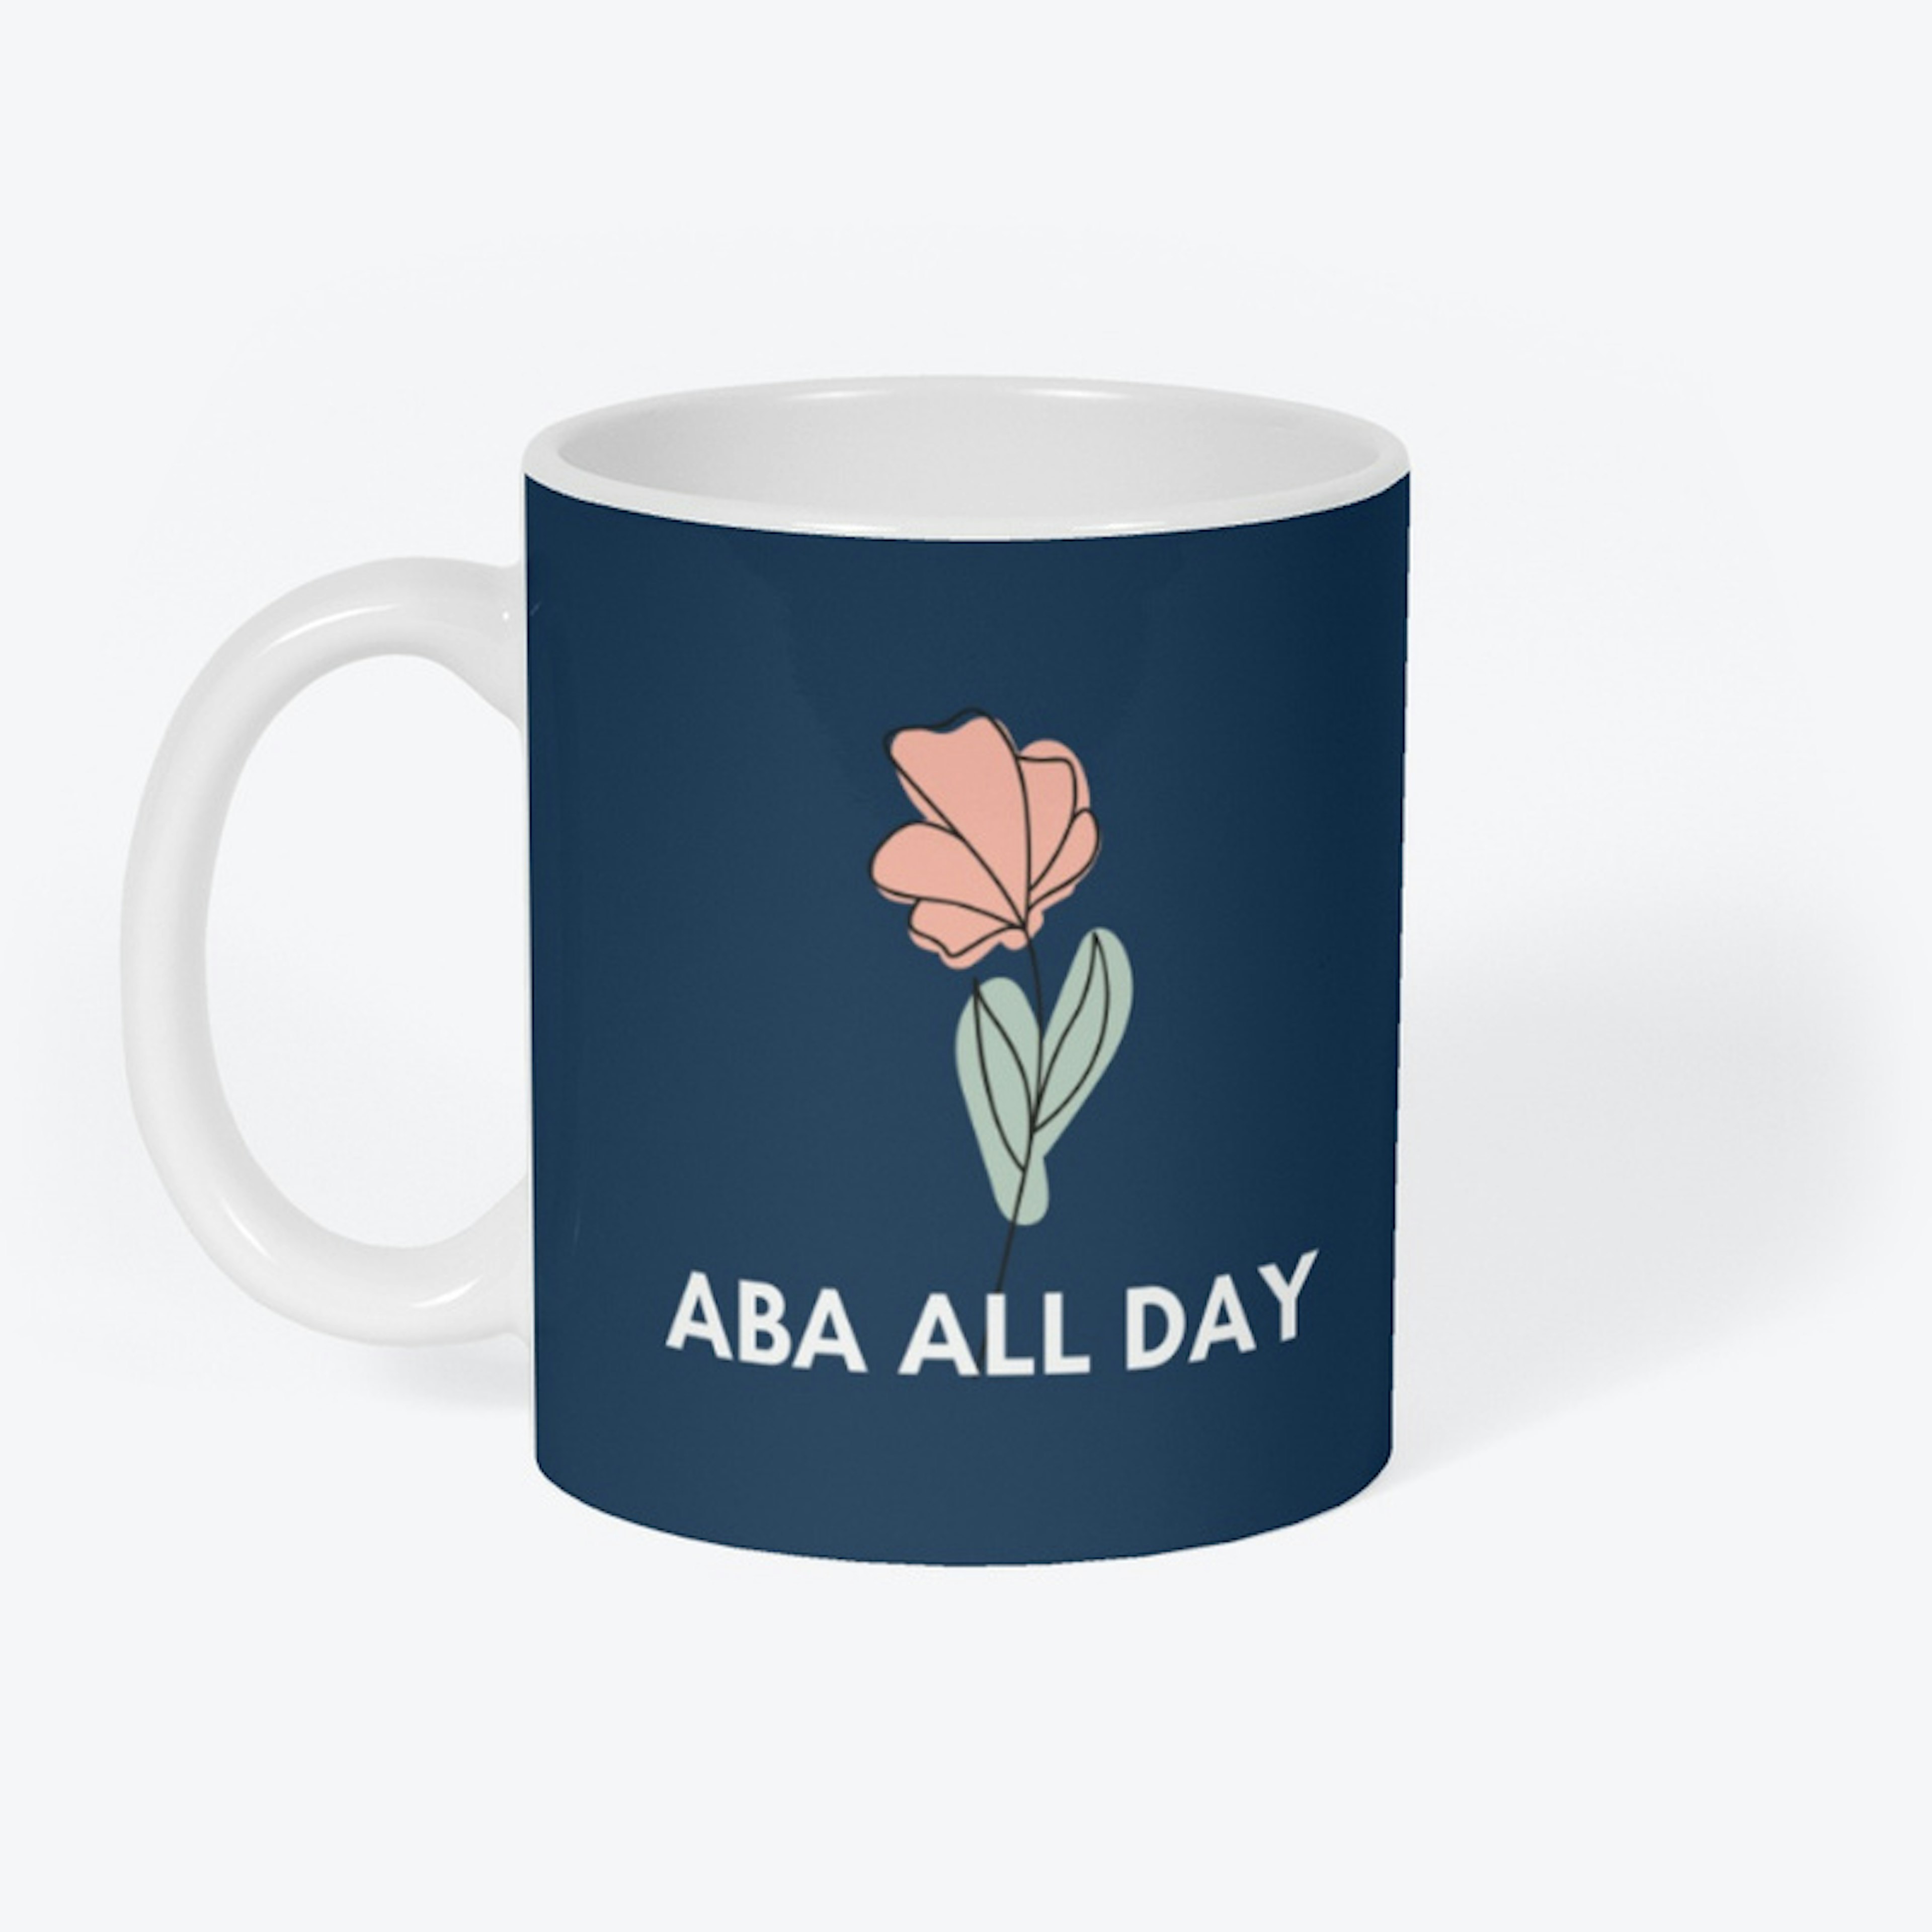 ABA All Day - white text